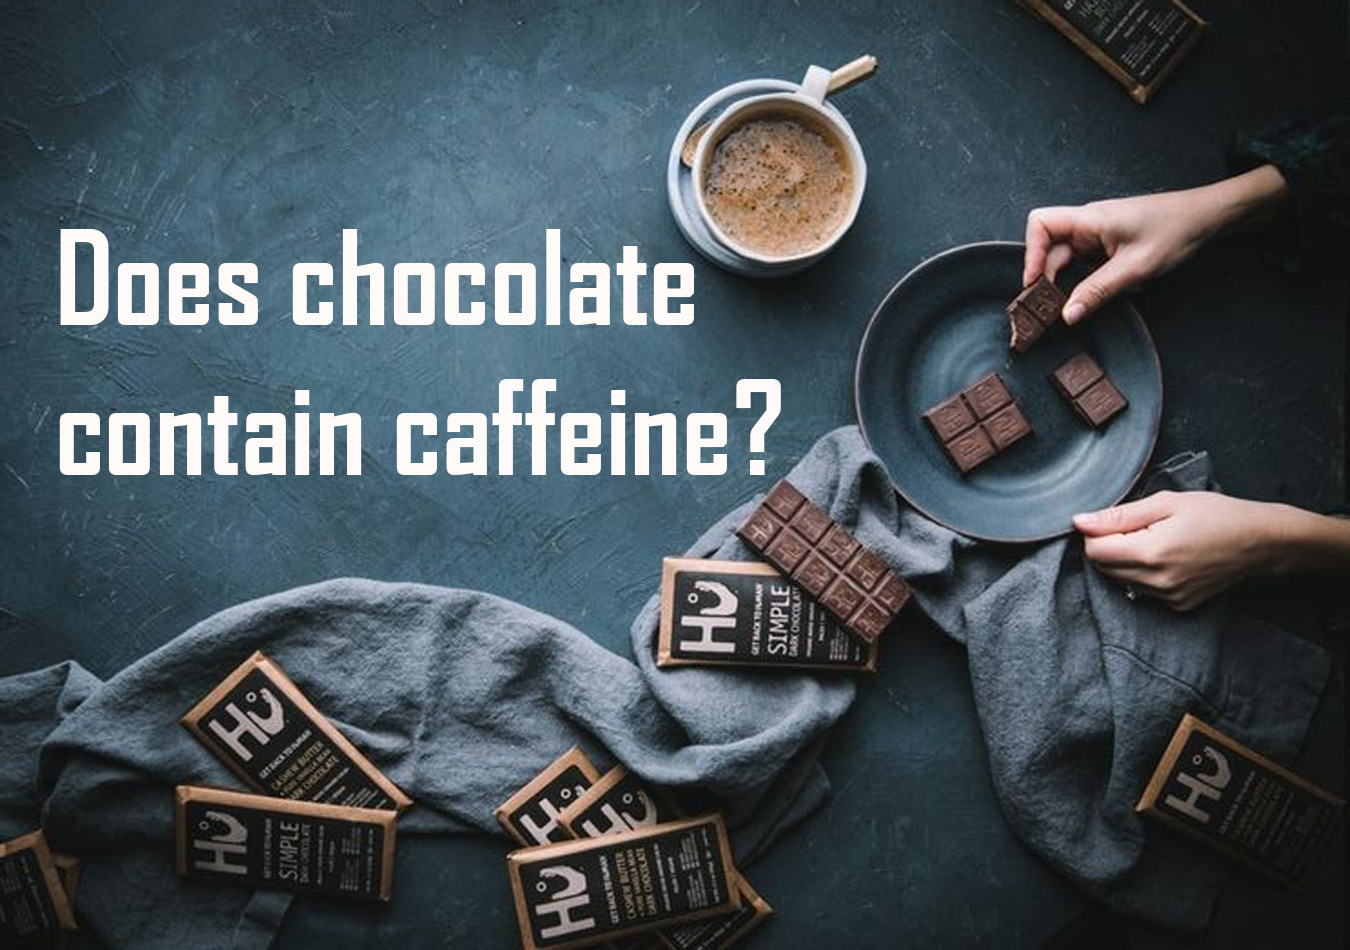 Does chocolate contain caffeine?